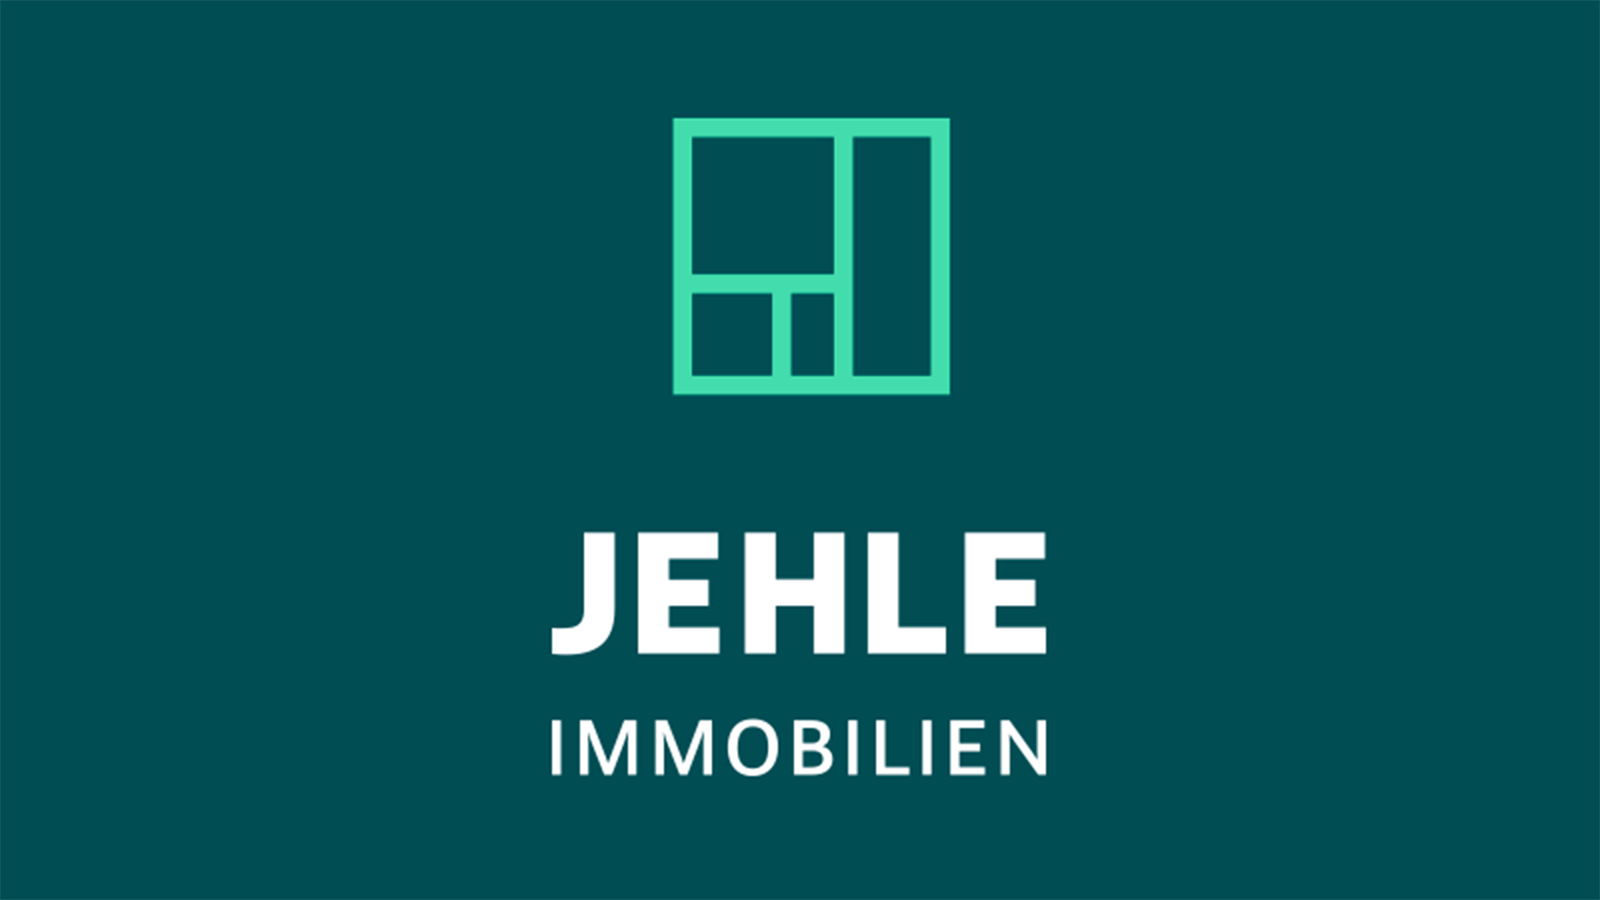 Jehle Immobilien